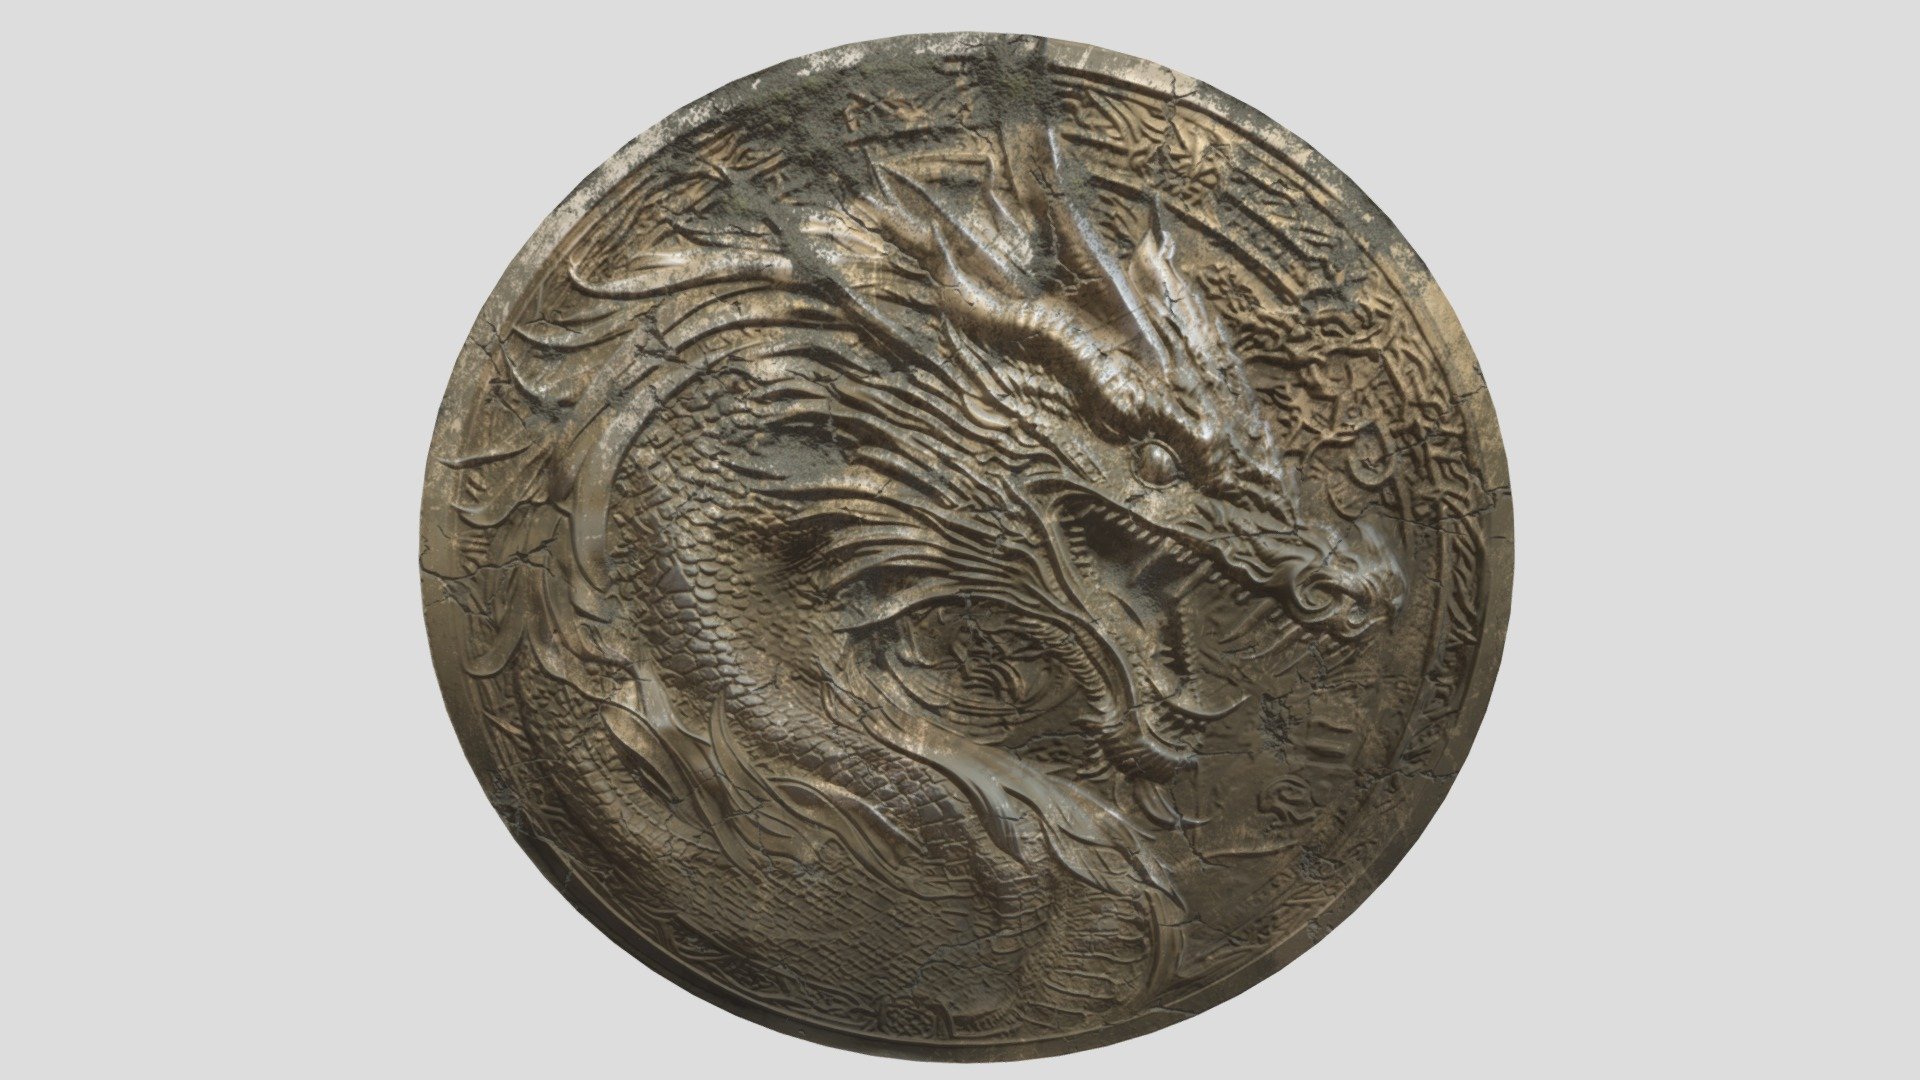 Fantasy dragon coin made with Mid Journey, Photoshop, Substance Painter, Sampler and Blender.  This is the last of the three coins. I hope you enjoy them. This one was made to appear to be heavily aged and worn 3d model